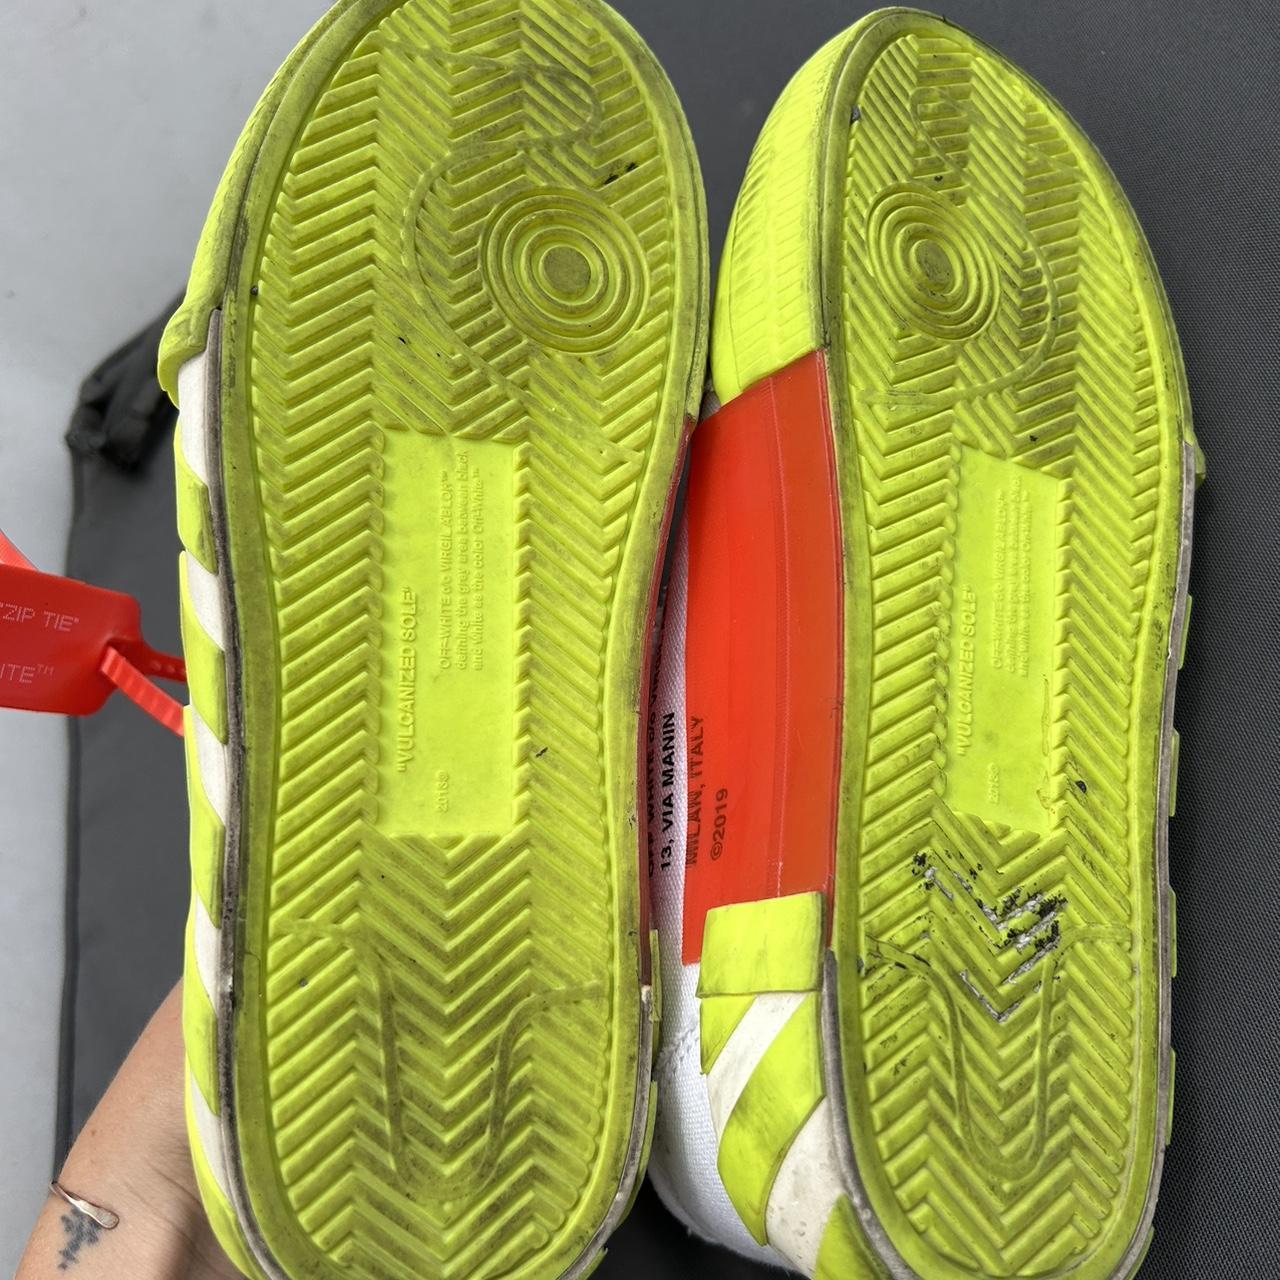 Off-White Women's Yellow and White Trainers (5)